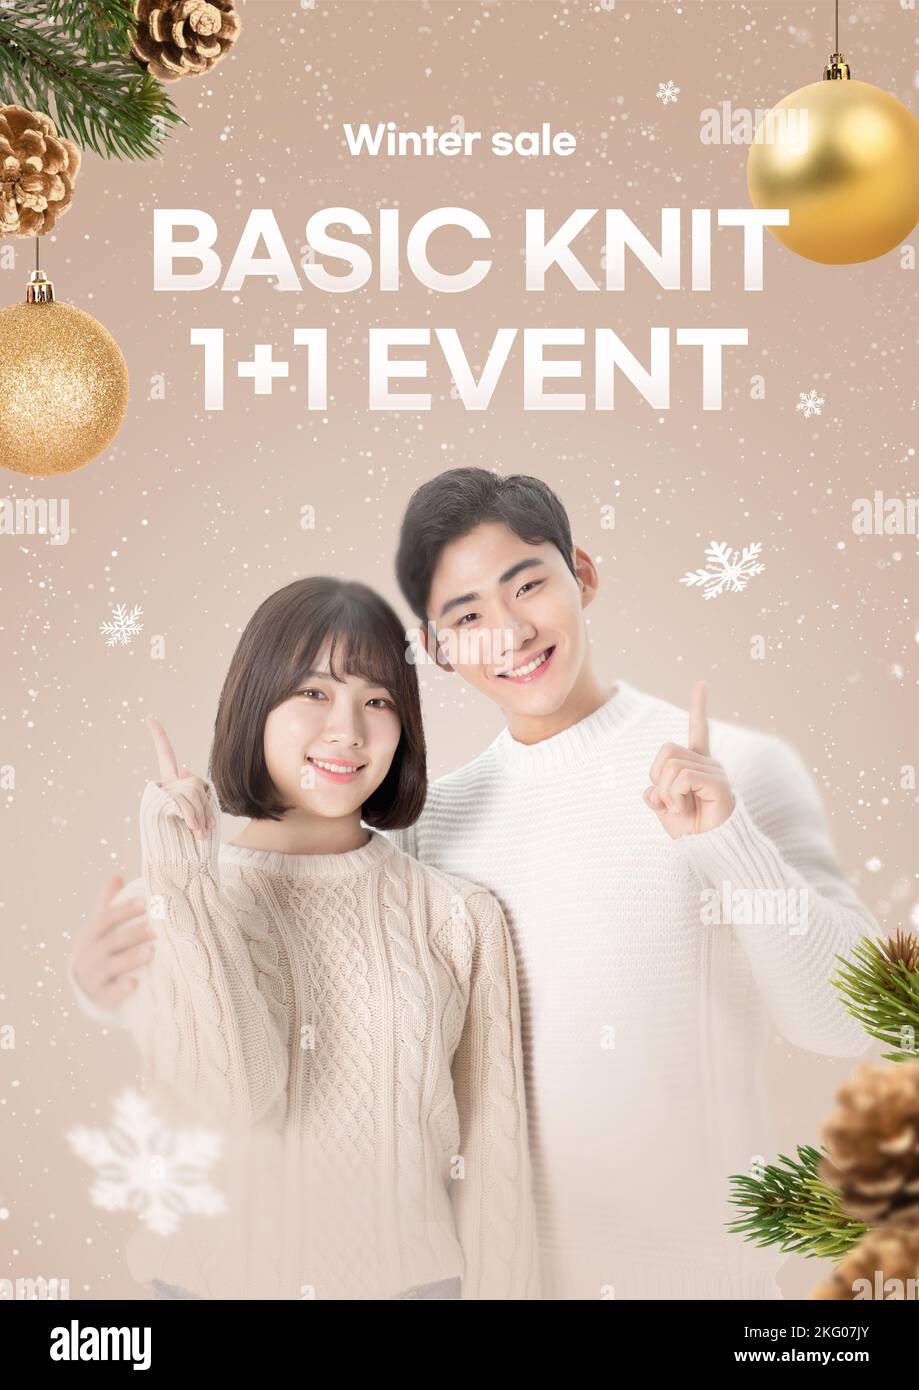 winter shopping sale event poster happy Asian Korean couple Stock Photo